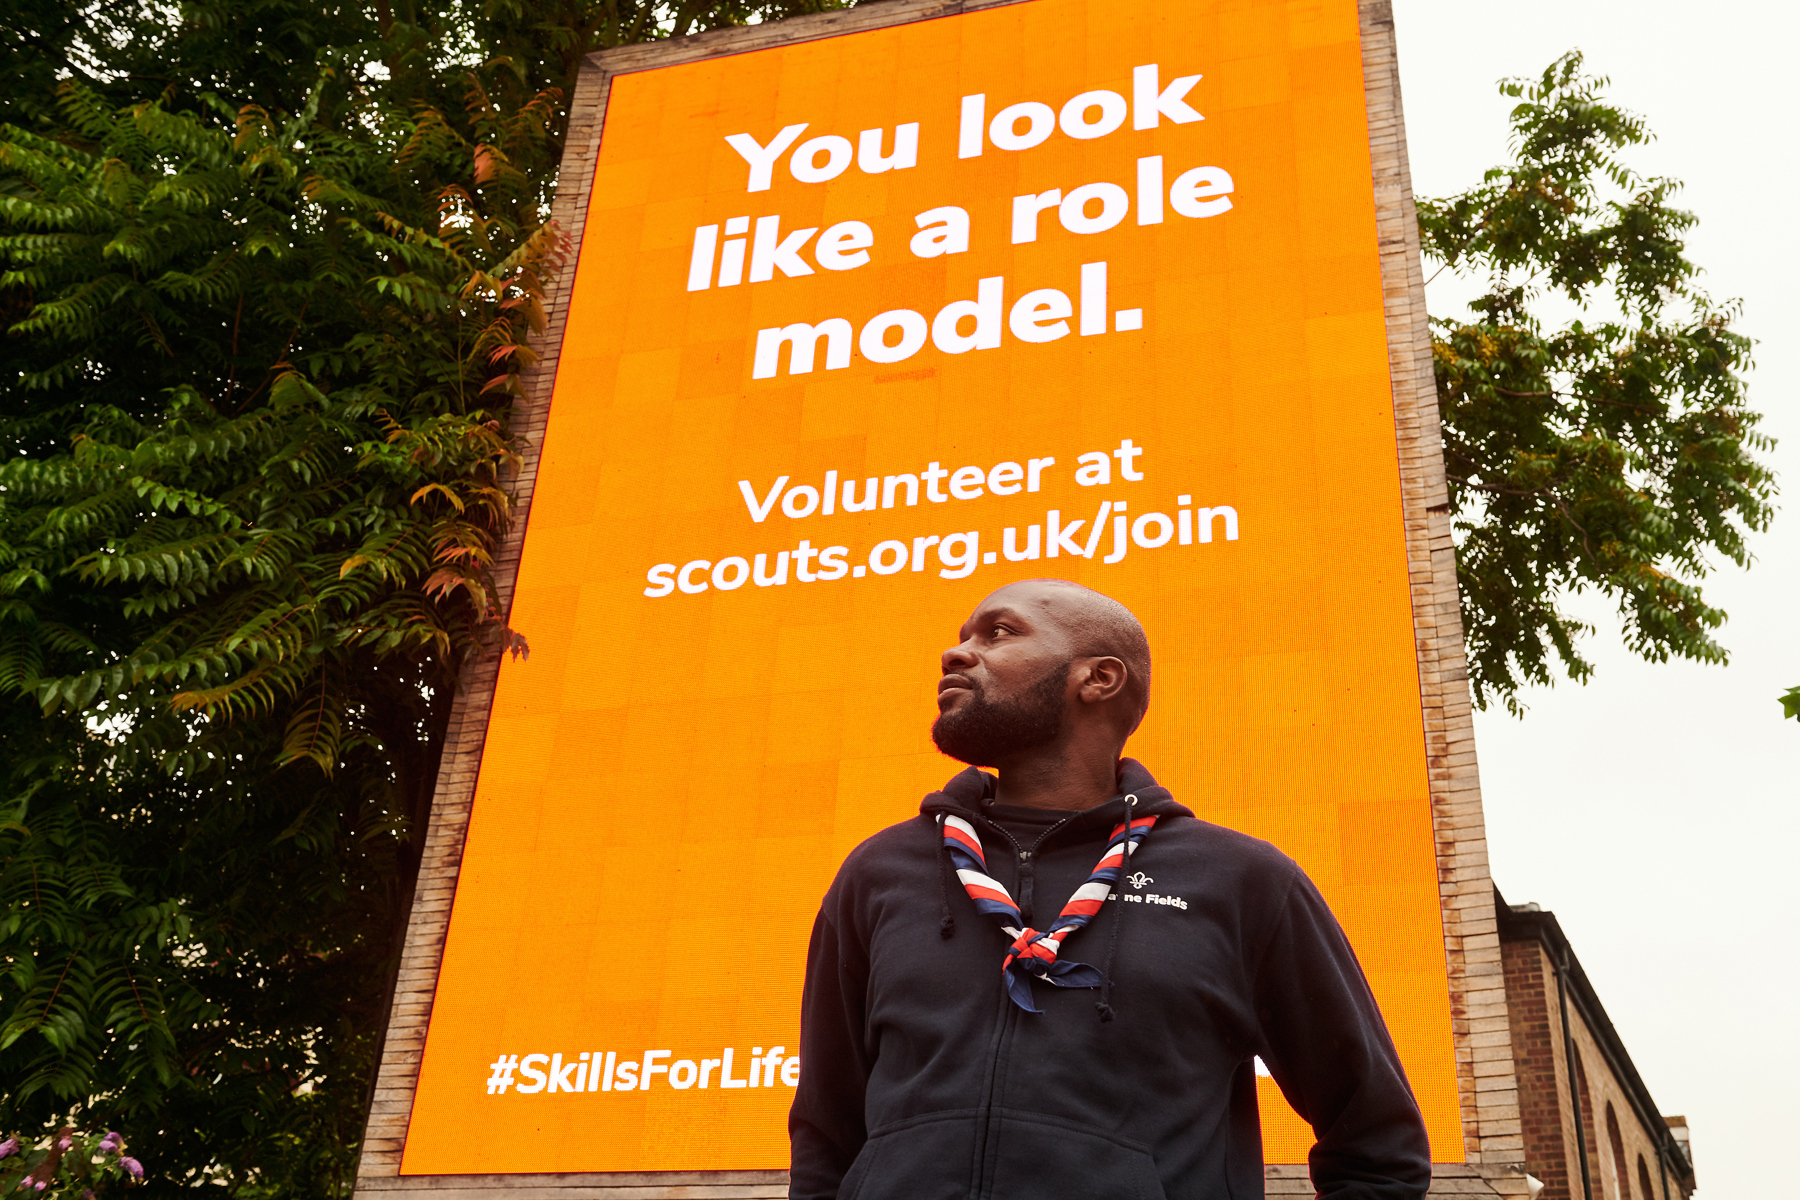 Dwayne Fields, wearing a black jacket and necker, stands in front of a sign saying 'You look like a role model'.